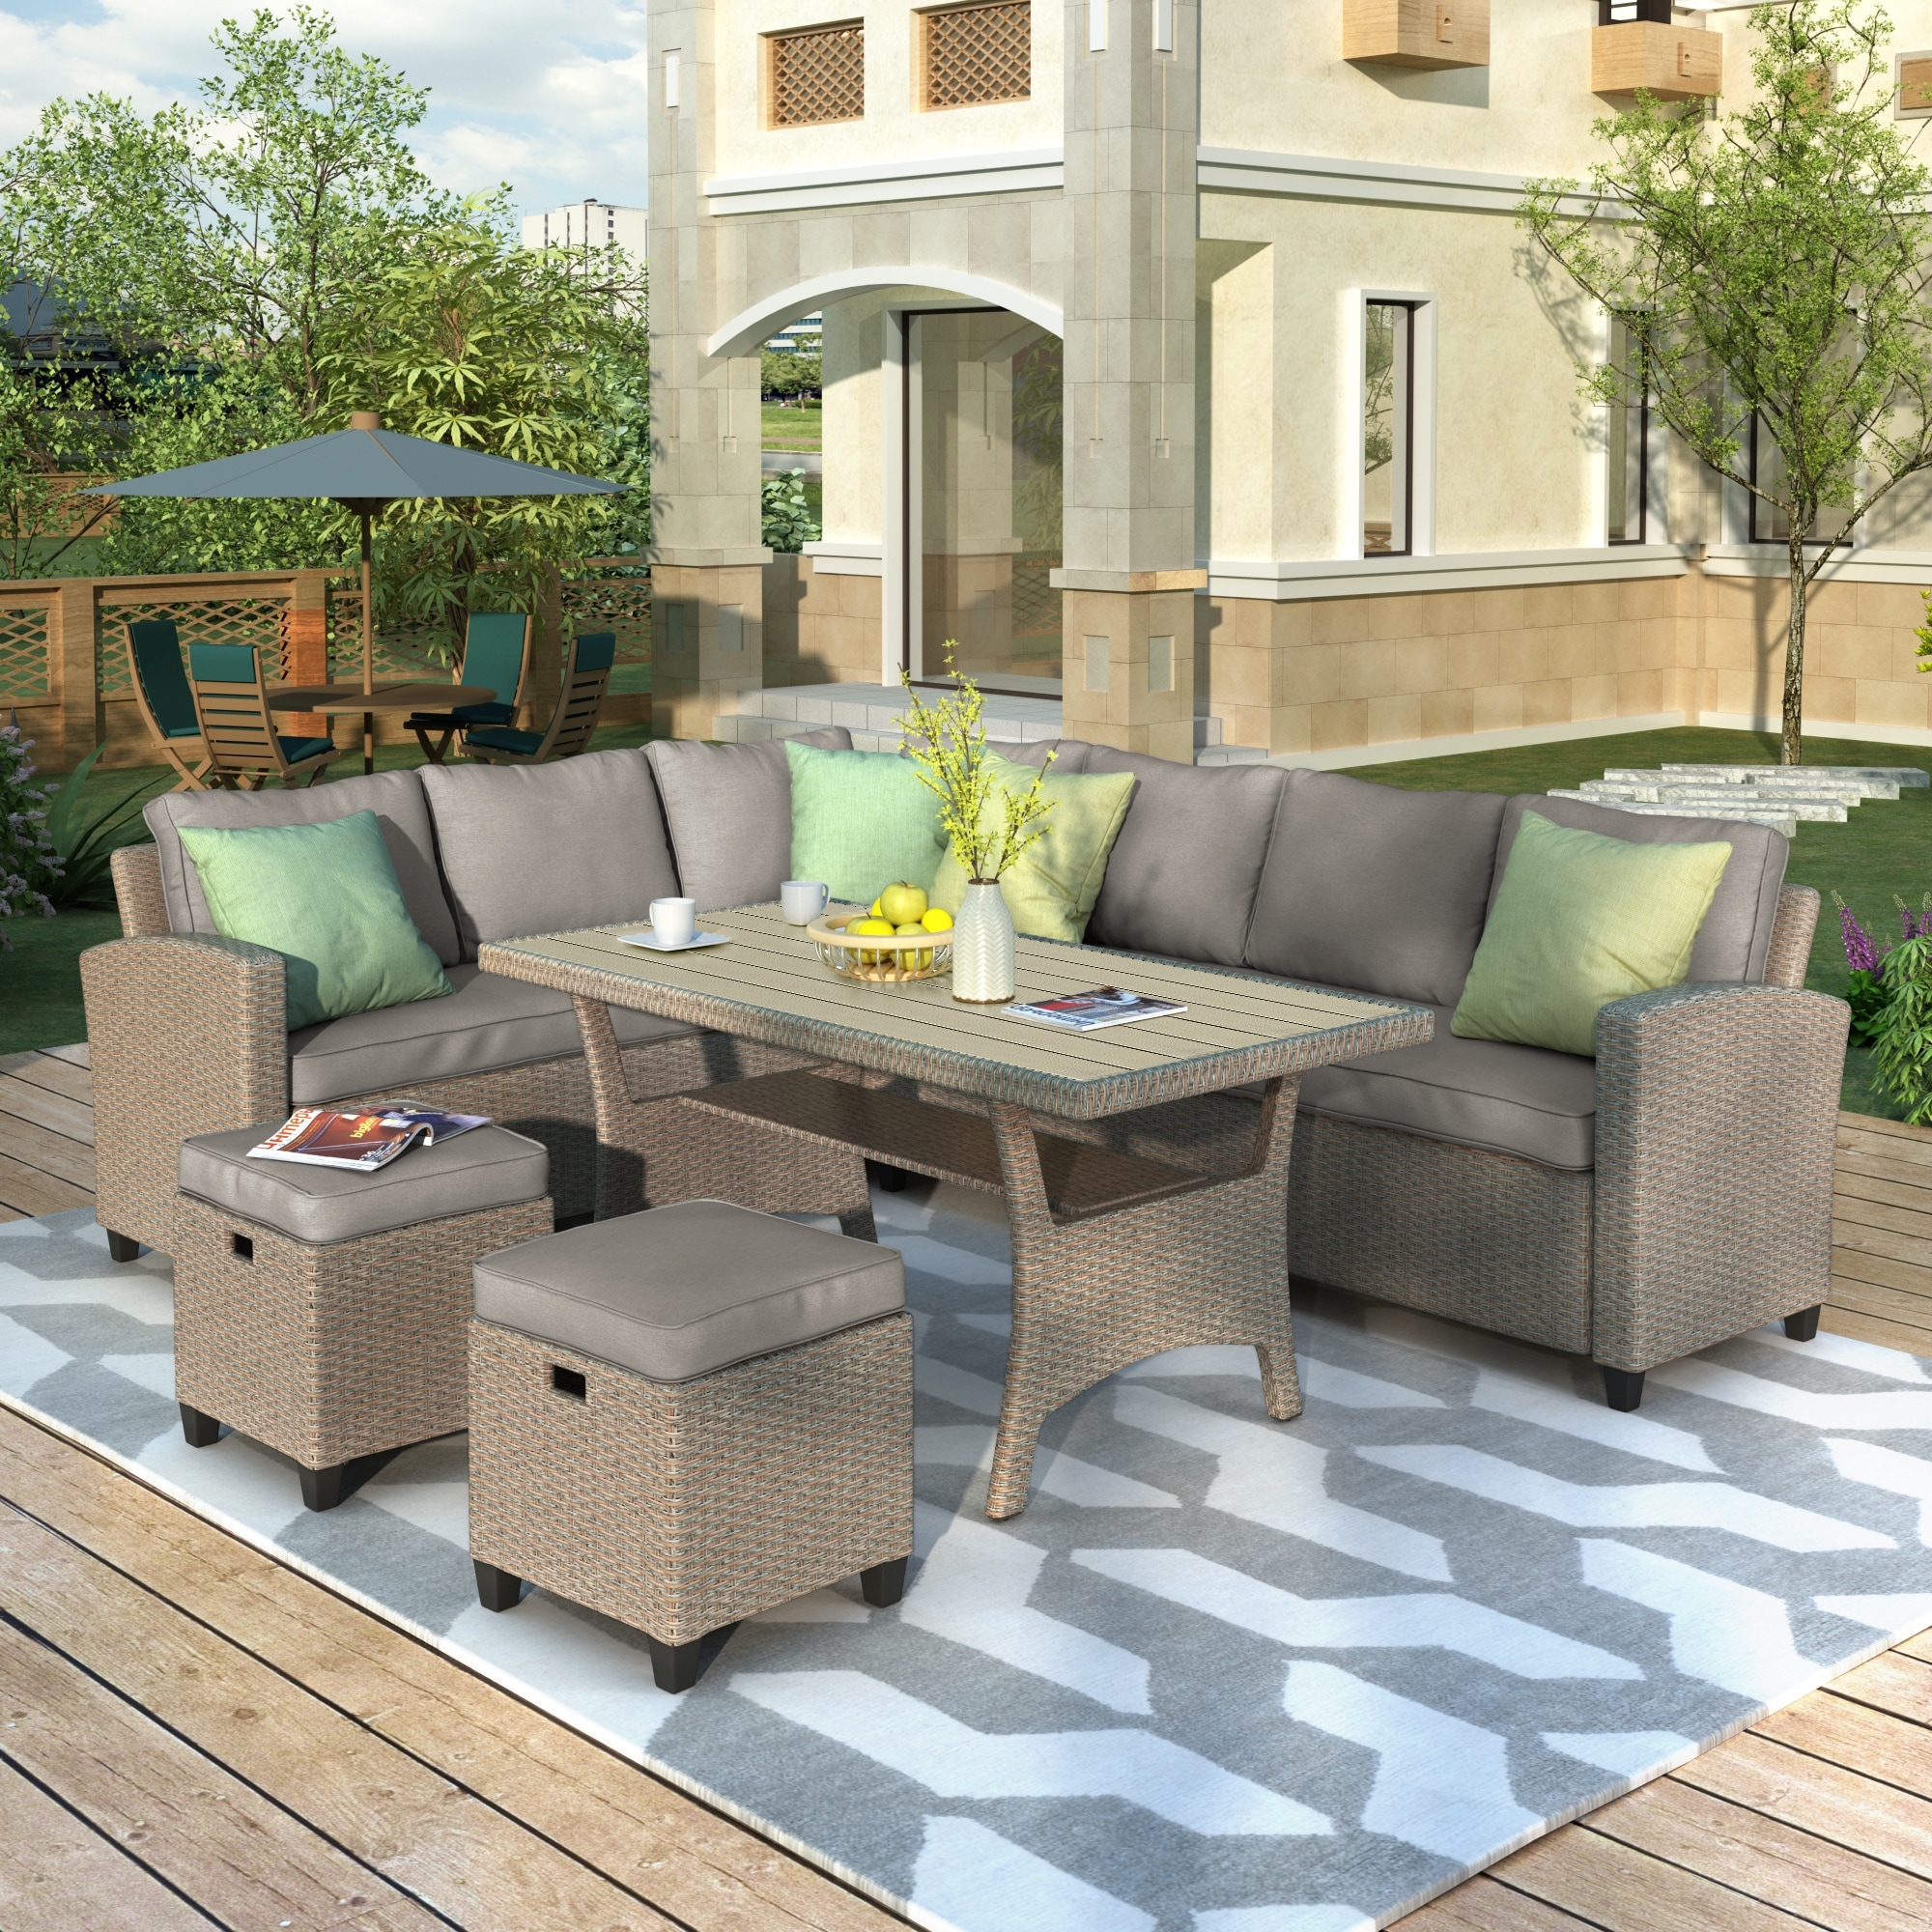 Beige 5 Piece Patio Furniture Set  Weatherproof Resin Wicker With Steel Frame  Thickened Cushioning And Lumbar Support